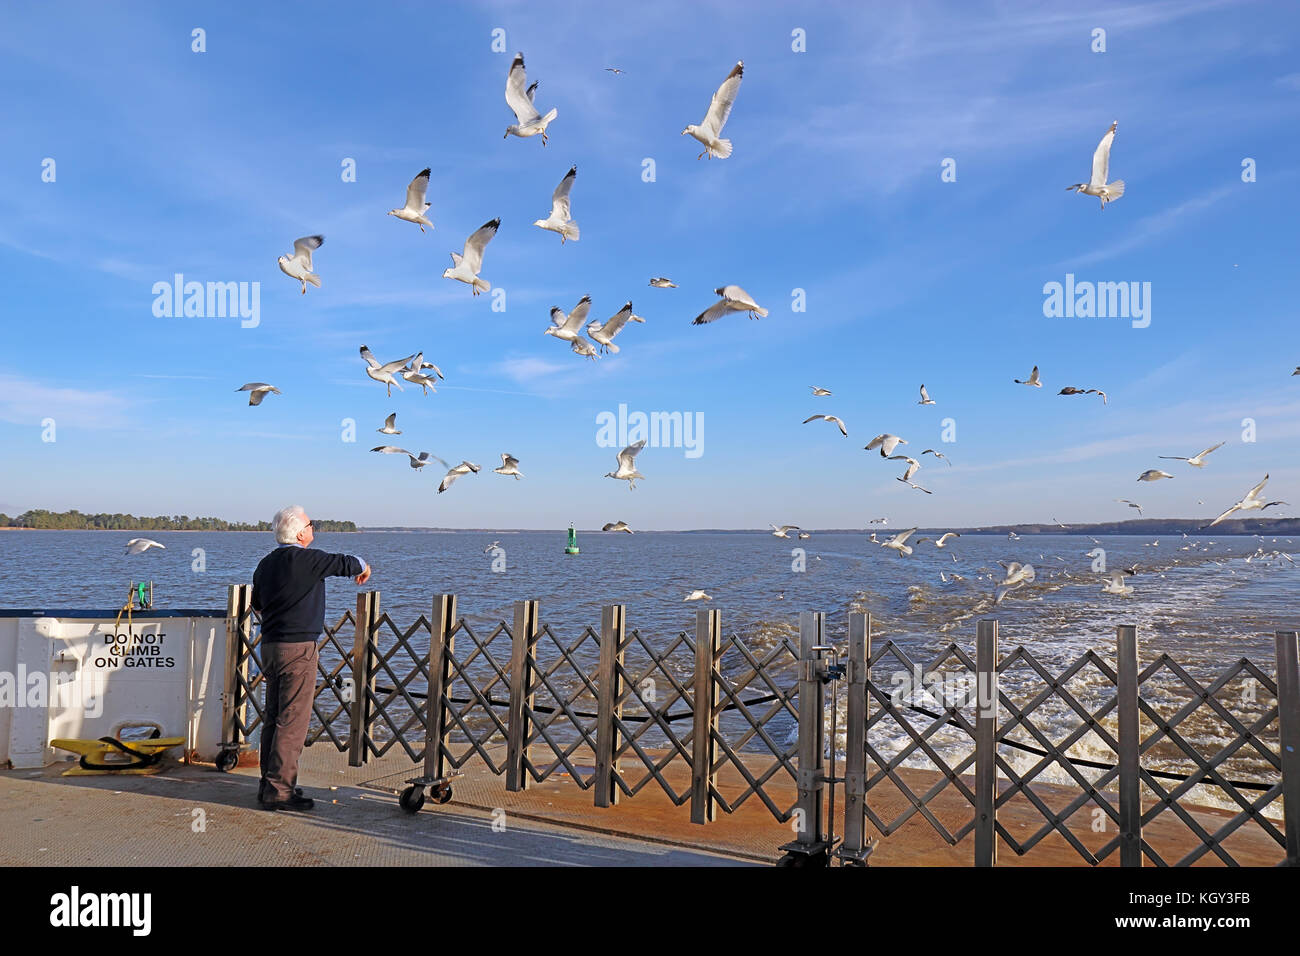 SCOTLAND, VIRGINIA - FEBRUARY 20 2017: Man feeding ring-billed seagulls from the aft deck of the Jamestown-Scotland Ferry boat Pocahontas. This histor Stock Photo